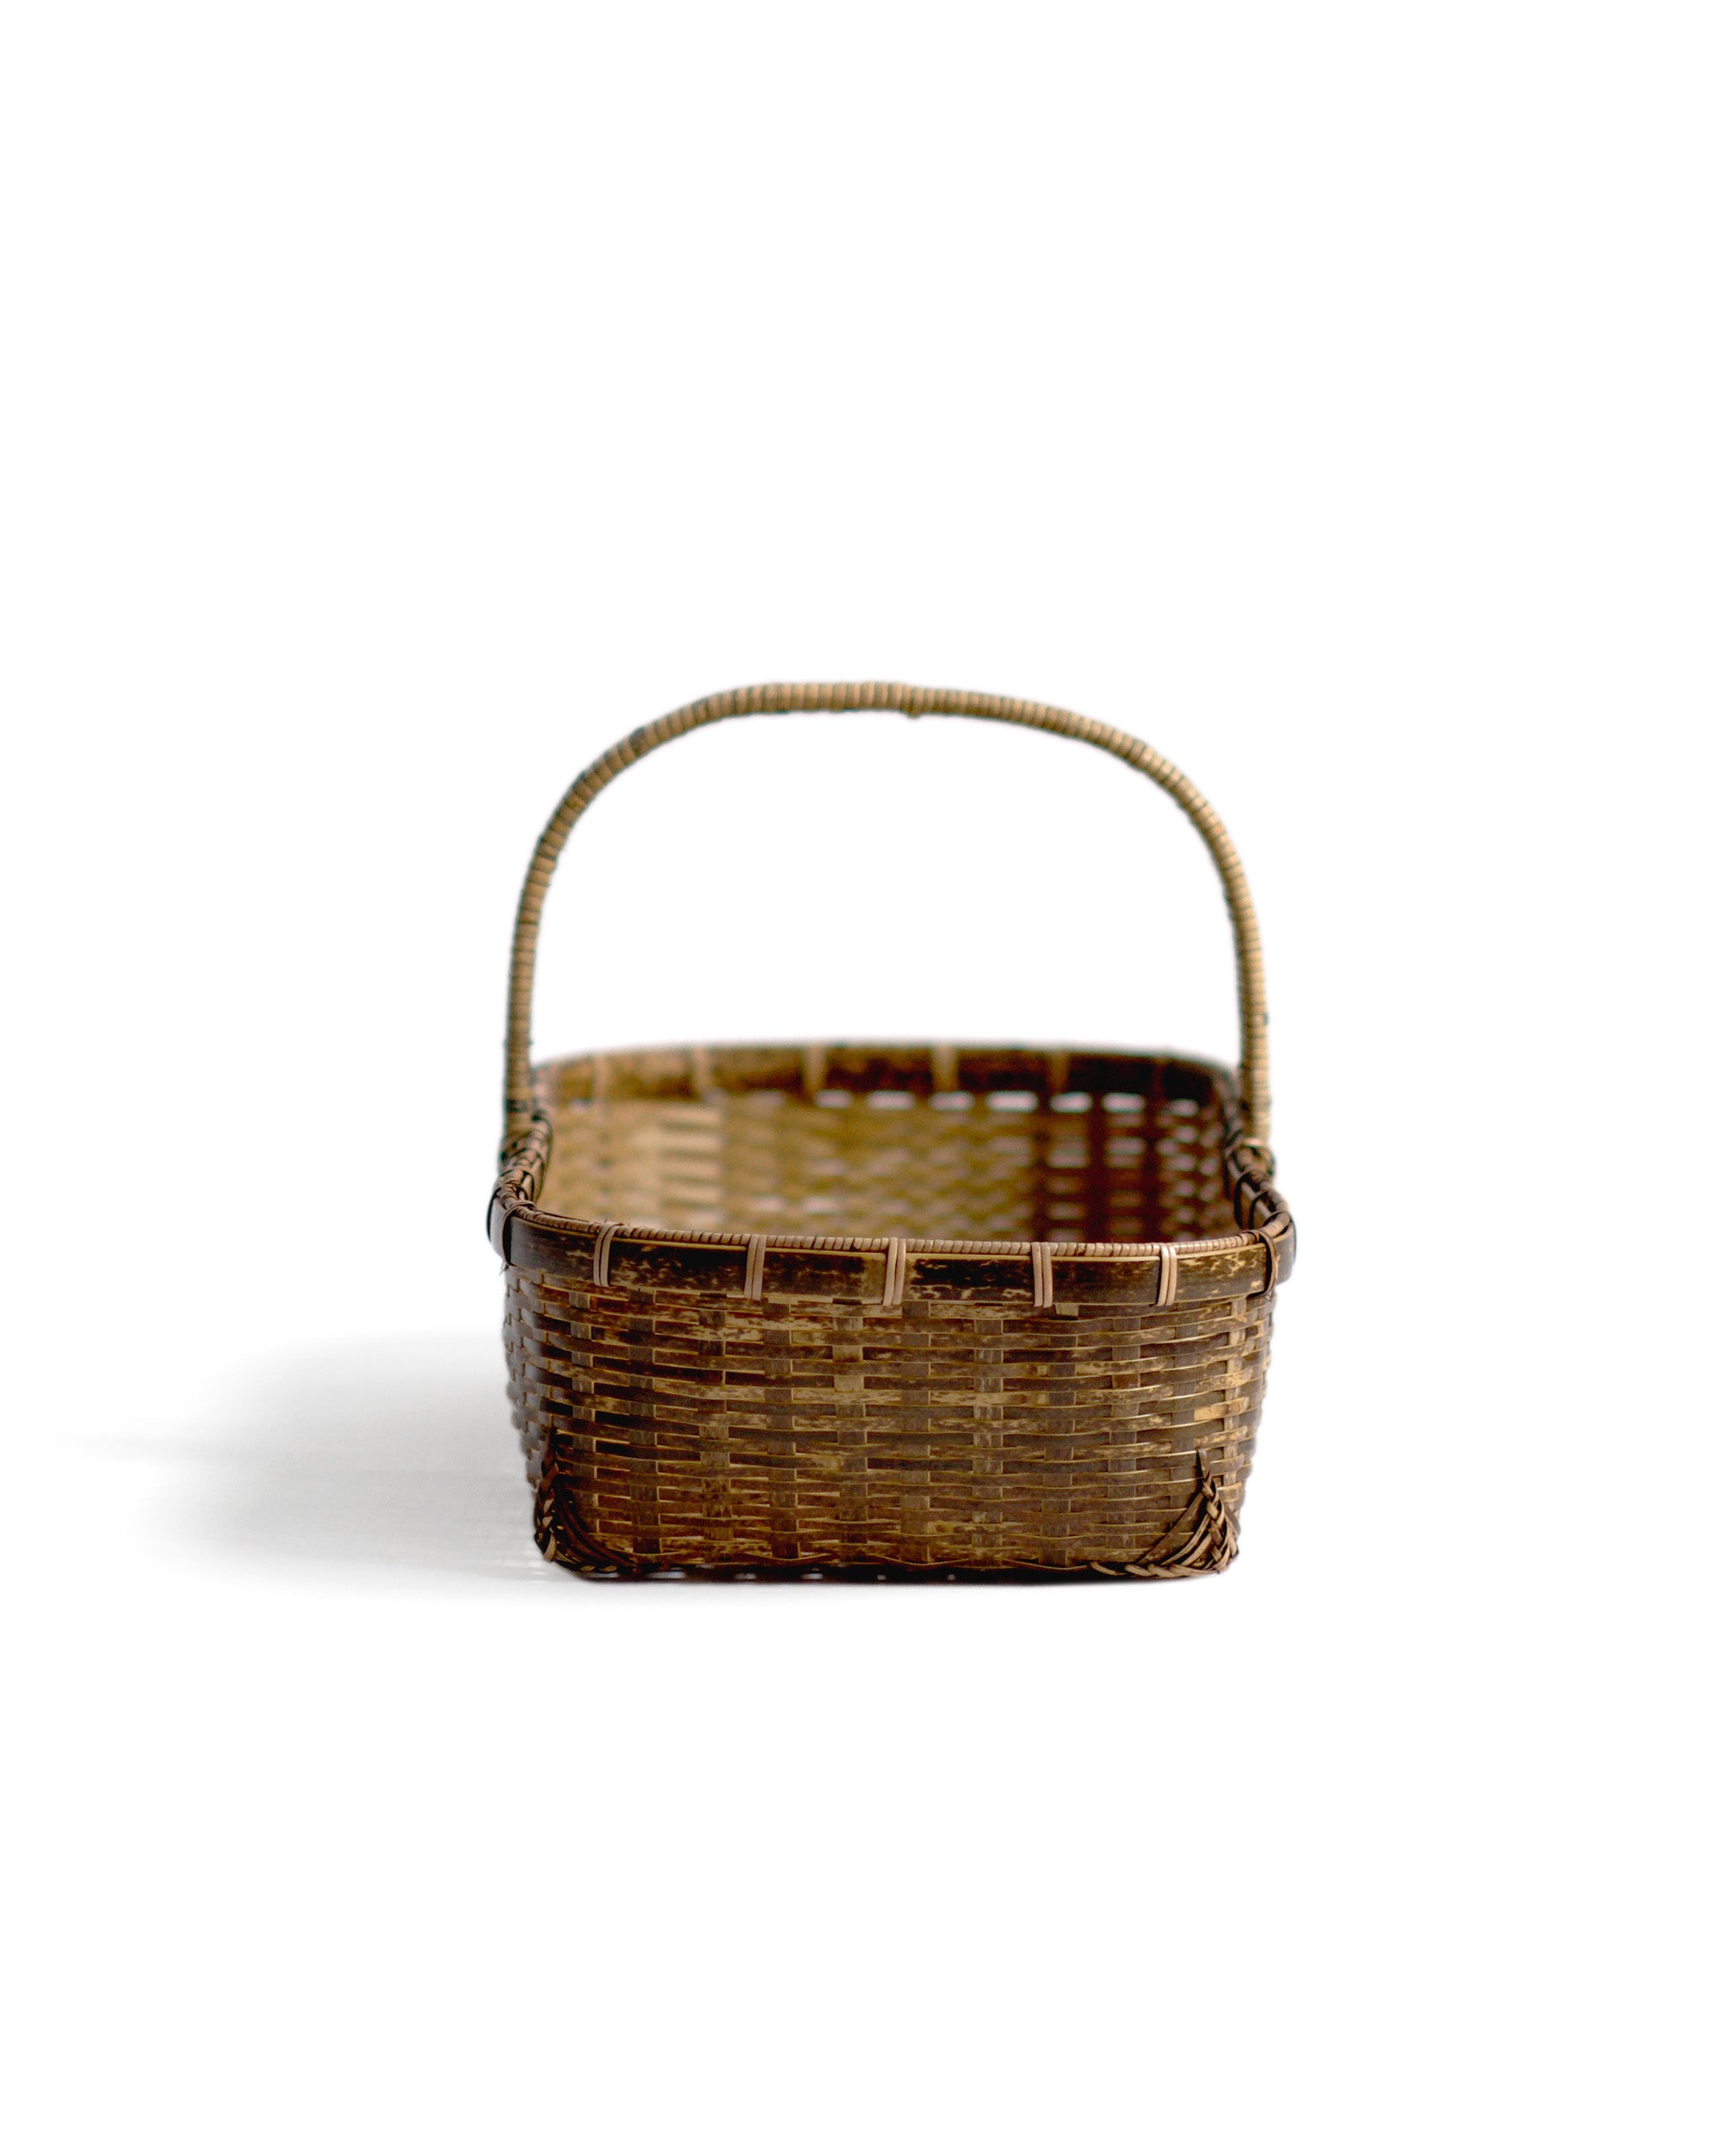 Silhouetted front image of long toradake bread basket with handle by Kohchosai Kosuga against white background.